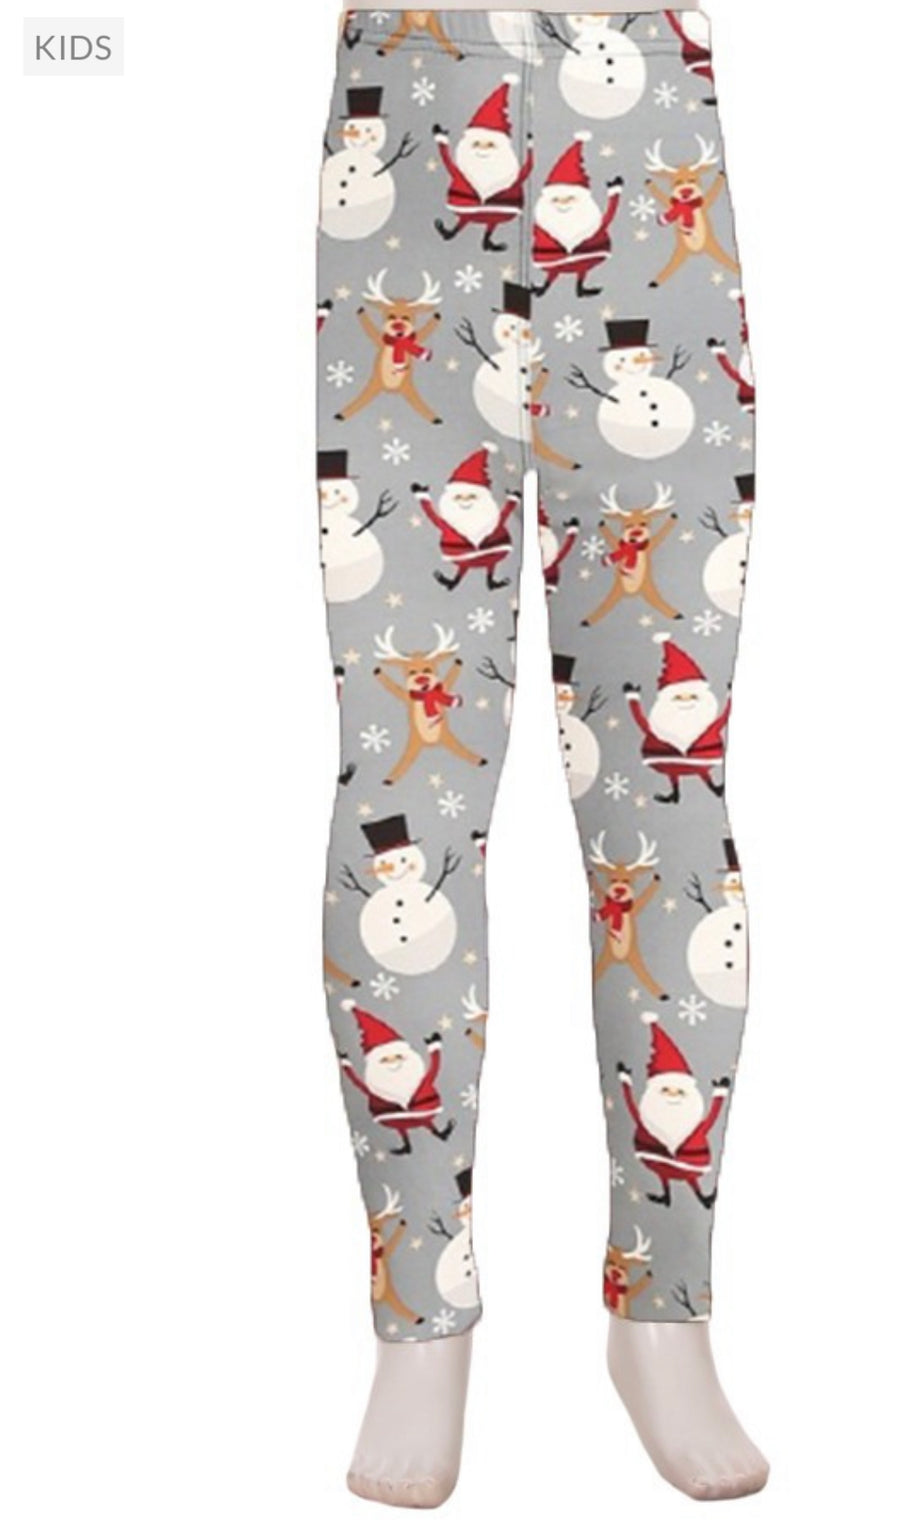 KIDS Buttery Soft Holiday Printed Leggings